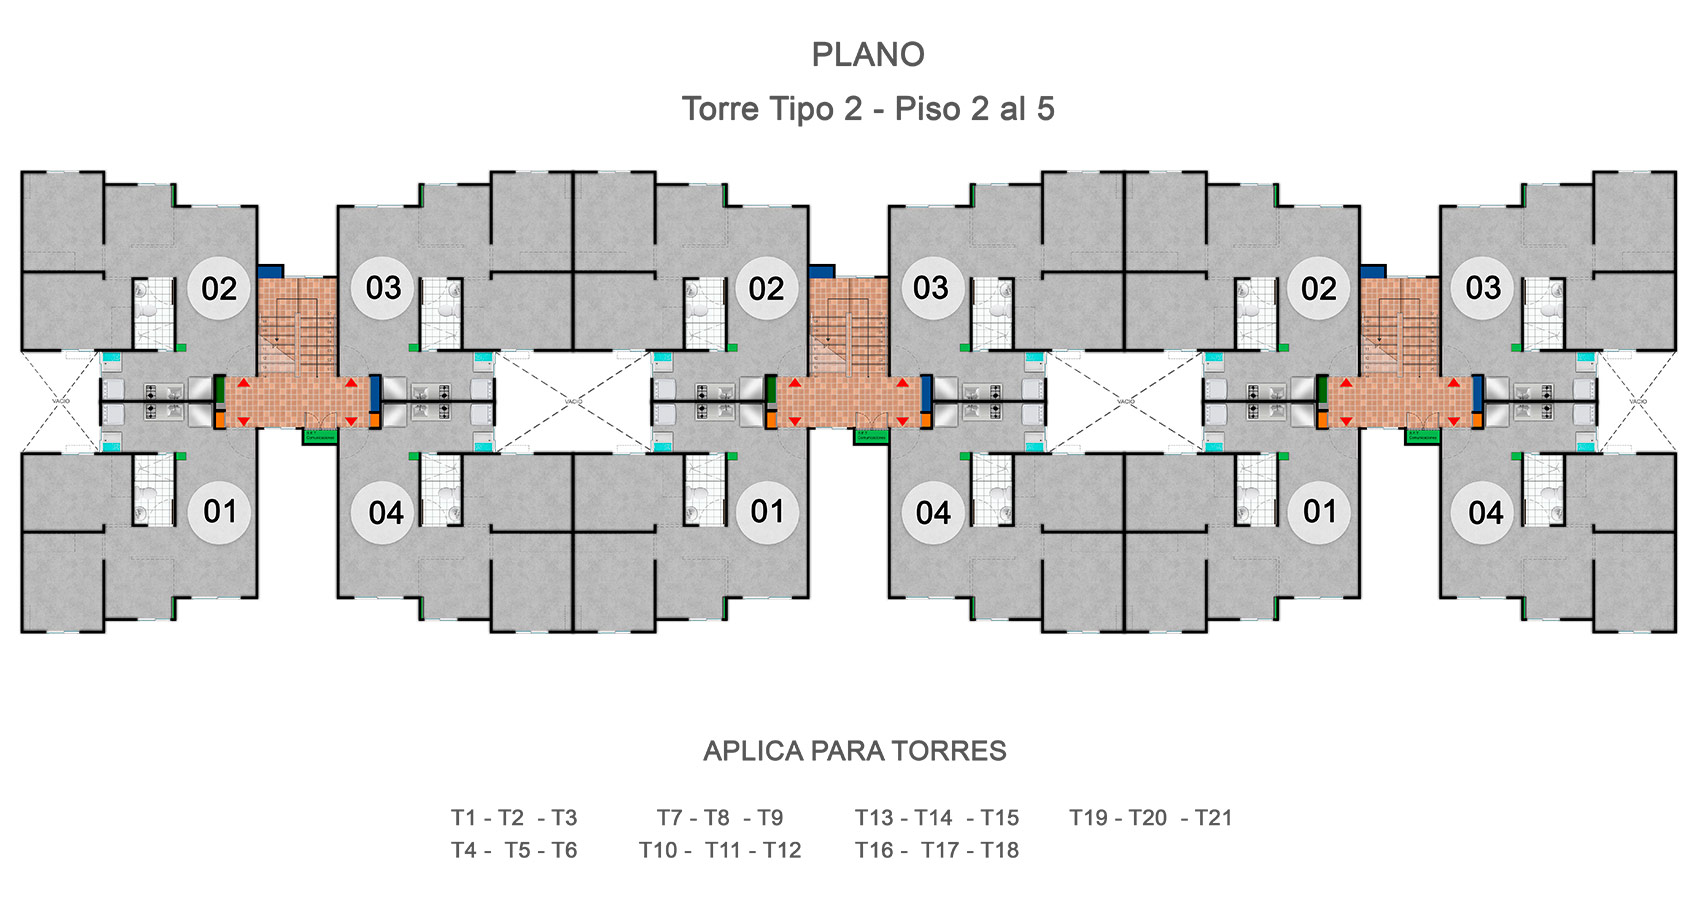 Plano Torre Tipo 2